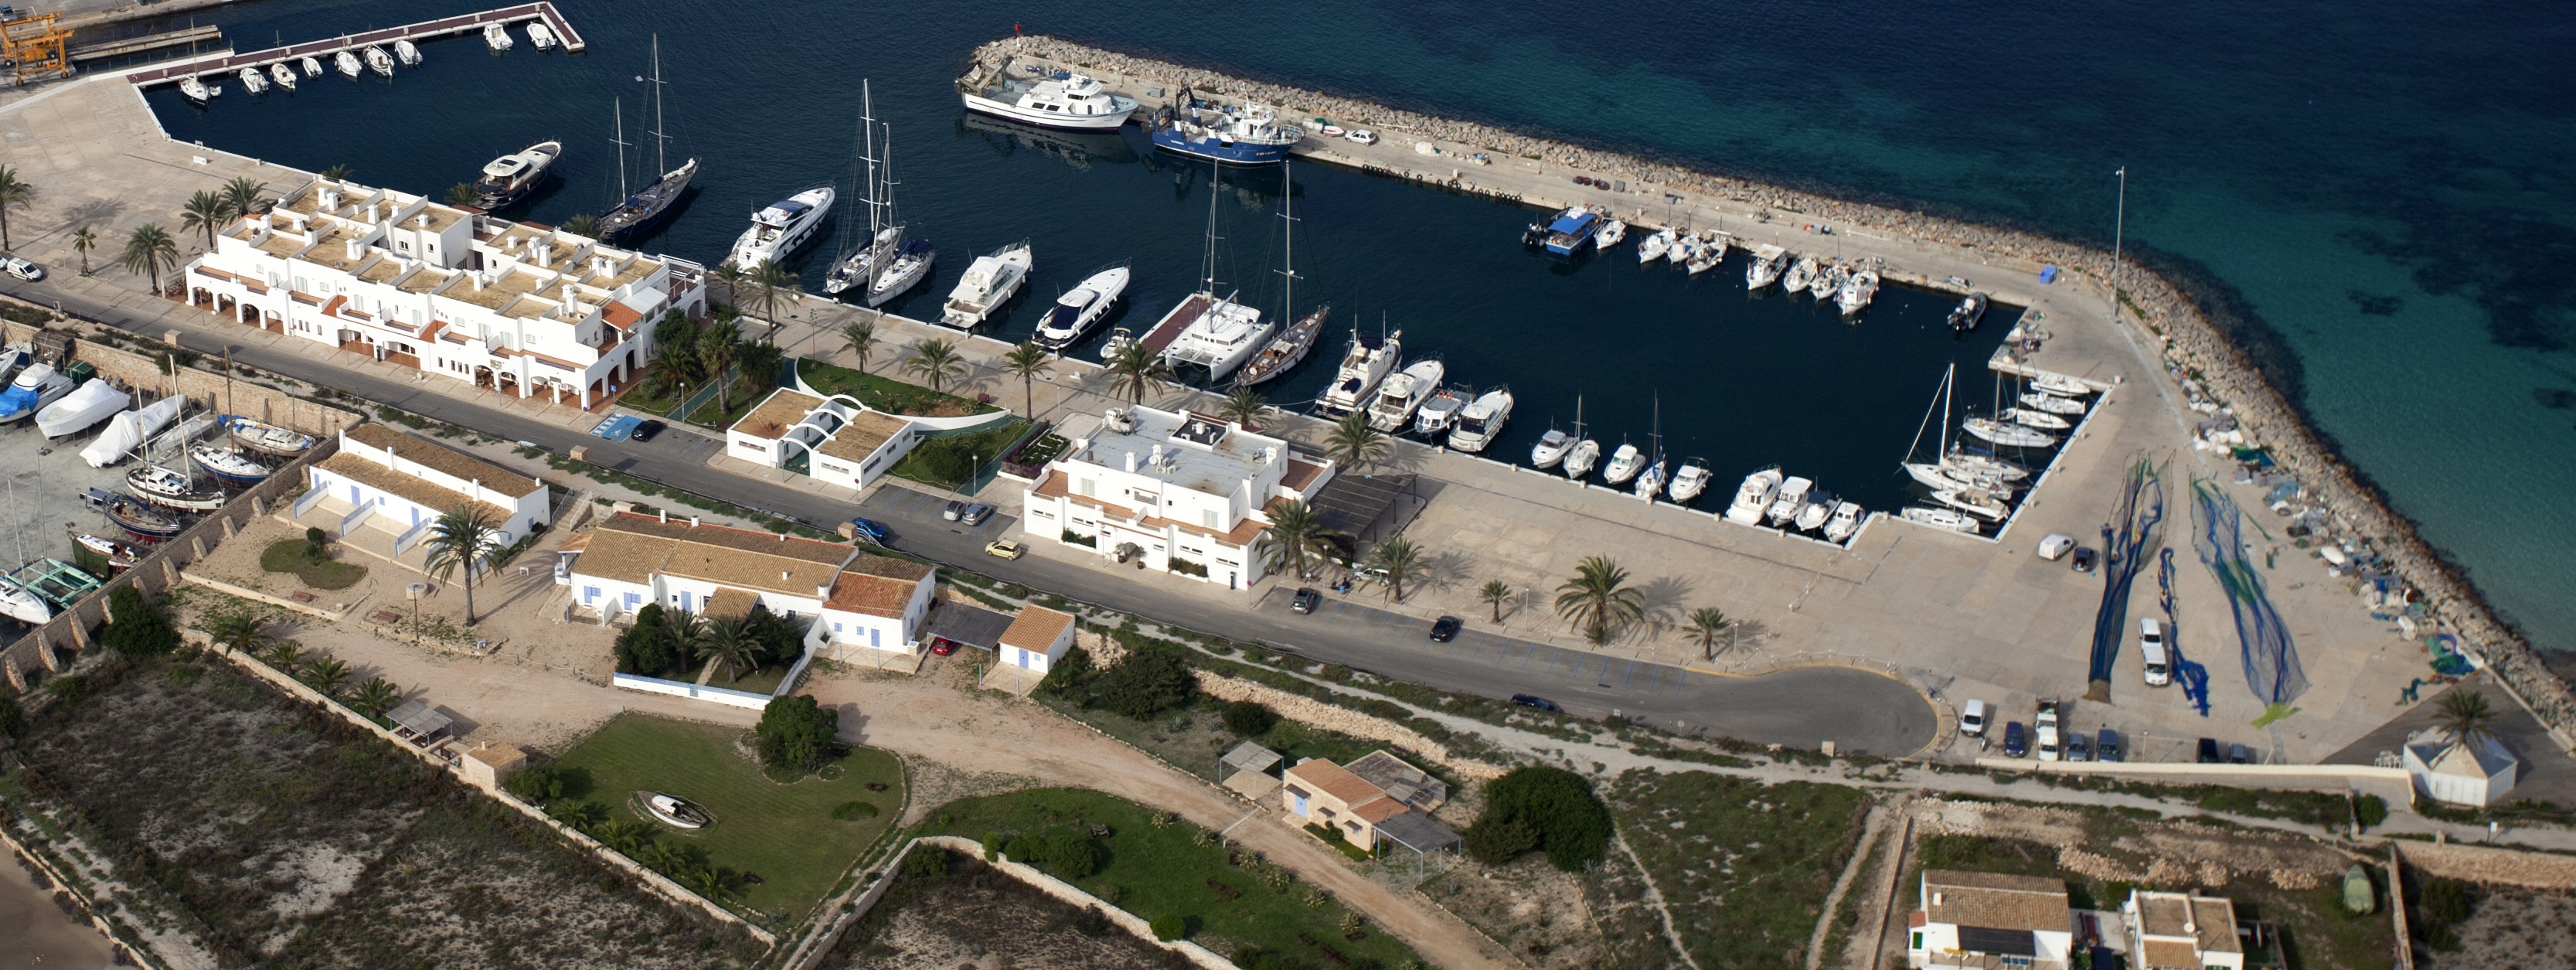 The APB will be putting out to public tender the management of the moorings in the small boat dock at the Port of La Savina and will be filing the concession request made by the Formentera Yacht Club